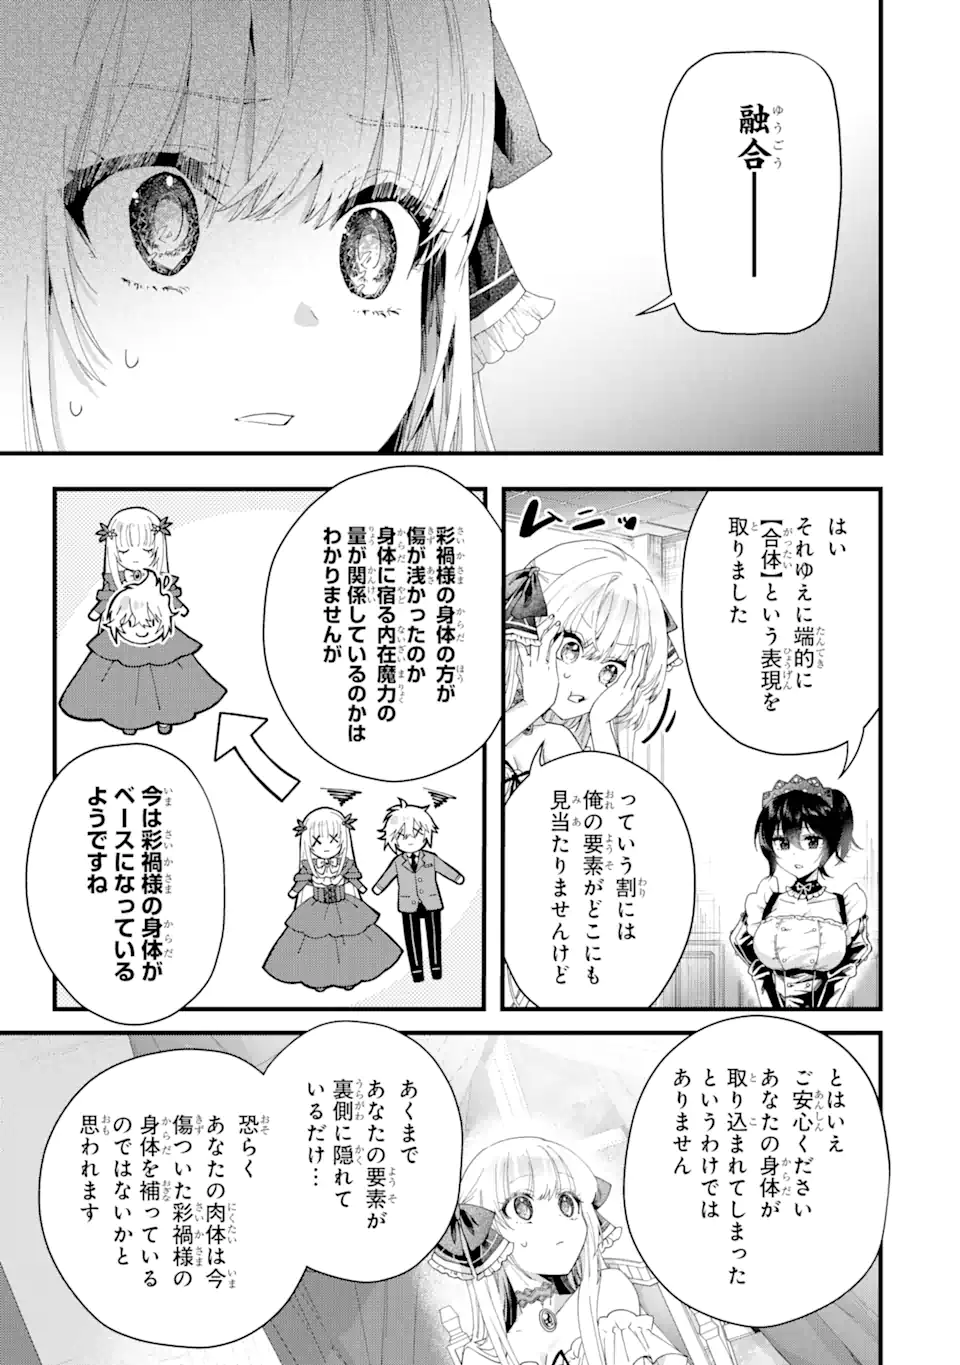 Ousama no Propose - Chapter 1.3 - Page 13